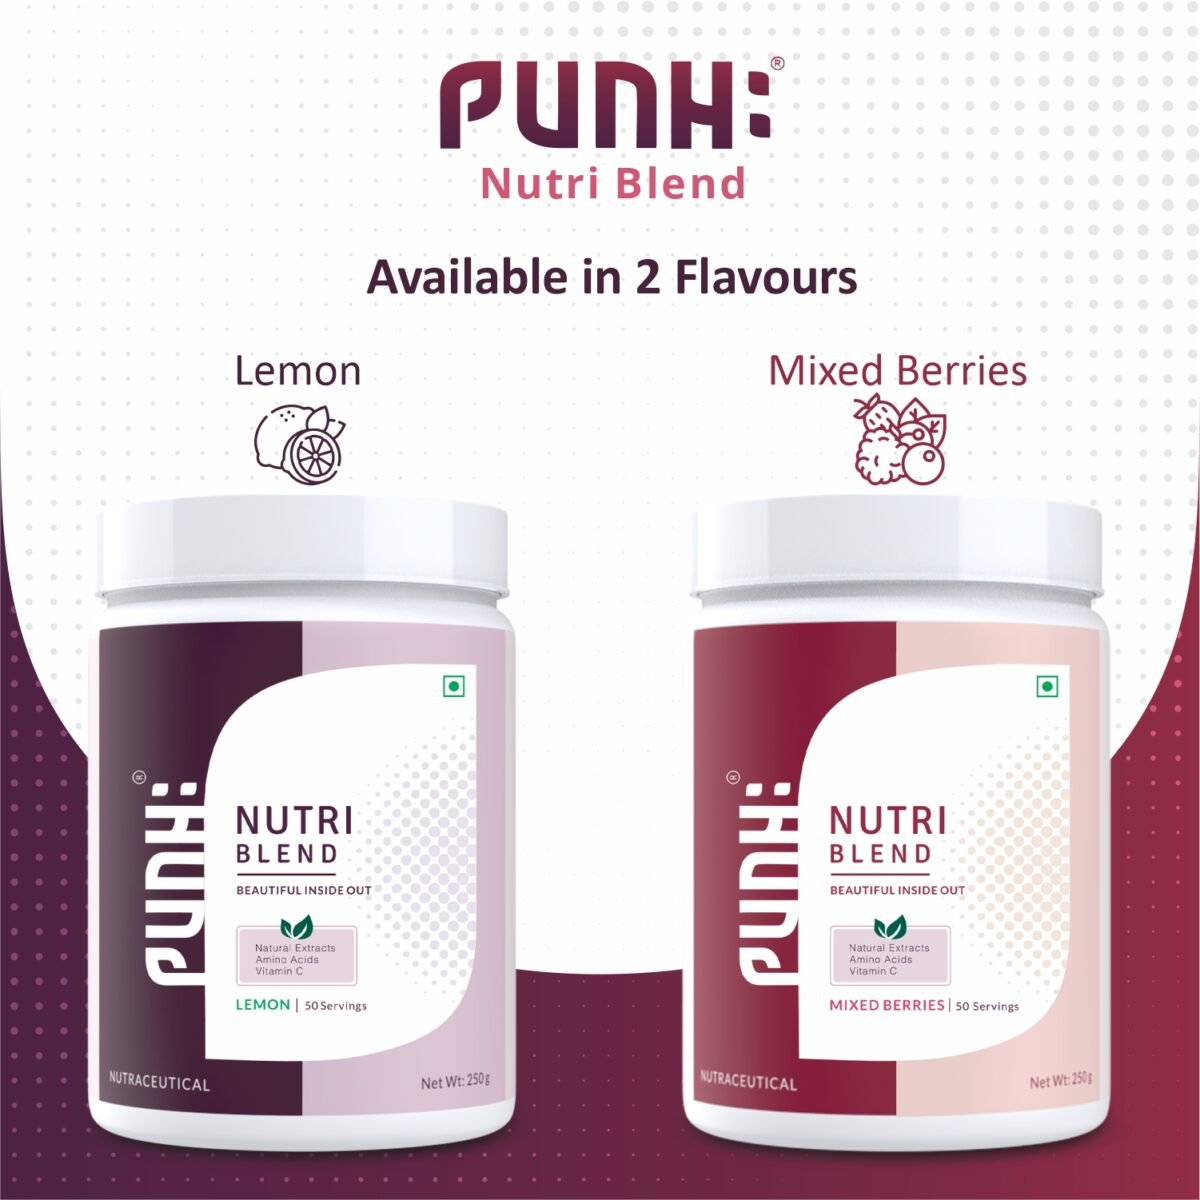 Punh Nutri Blend Available in 2 Flavours - Mixed Berries & Lemon